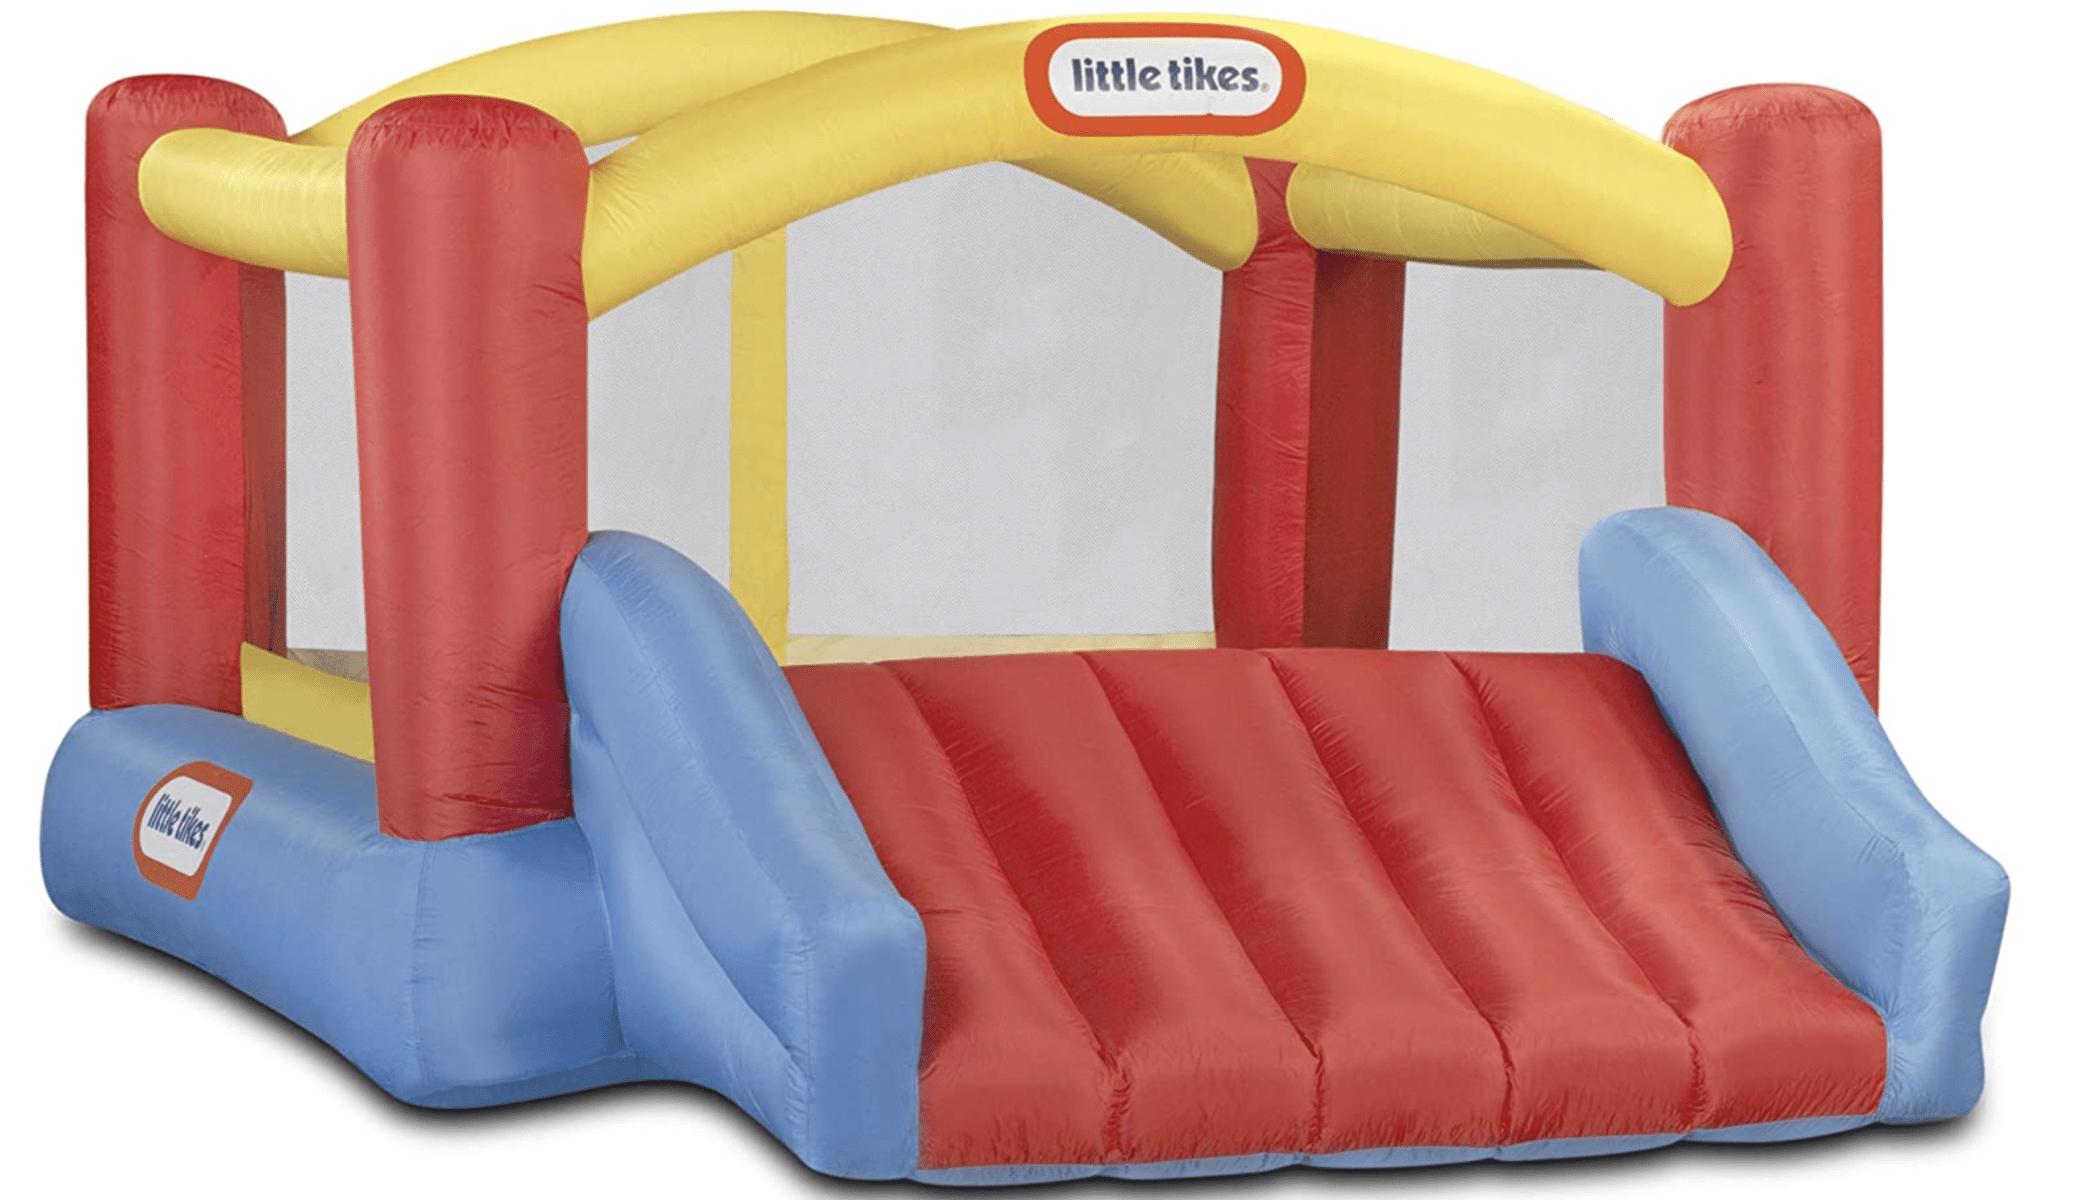 bounce house gift idea for kids